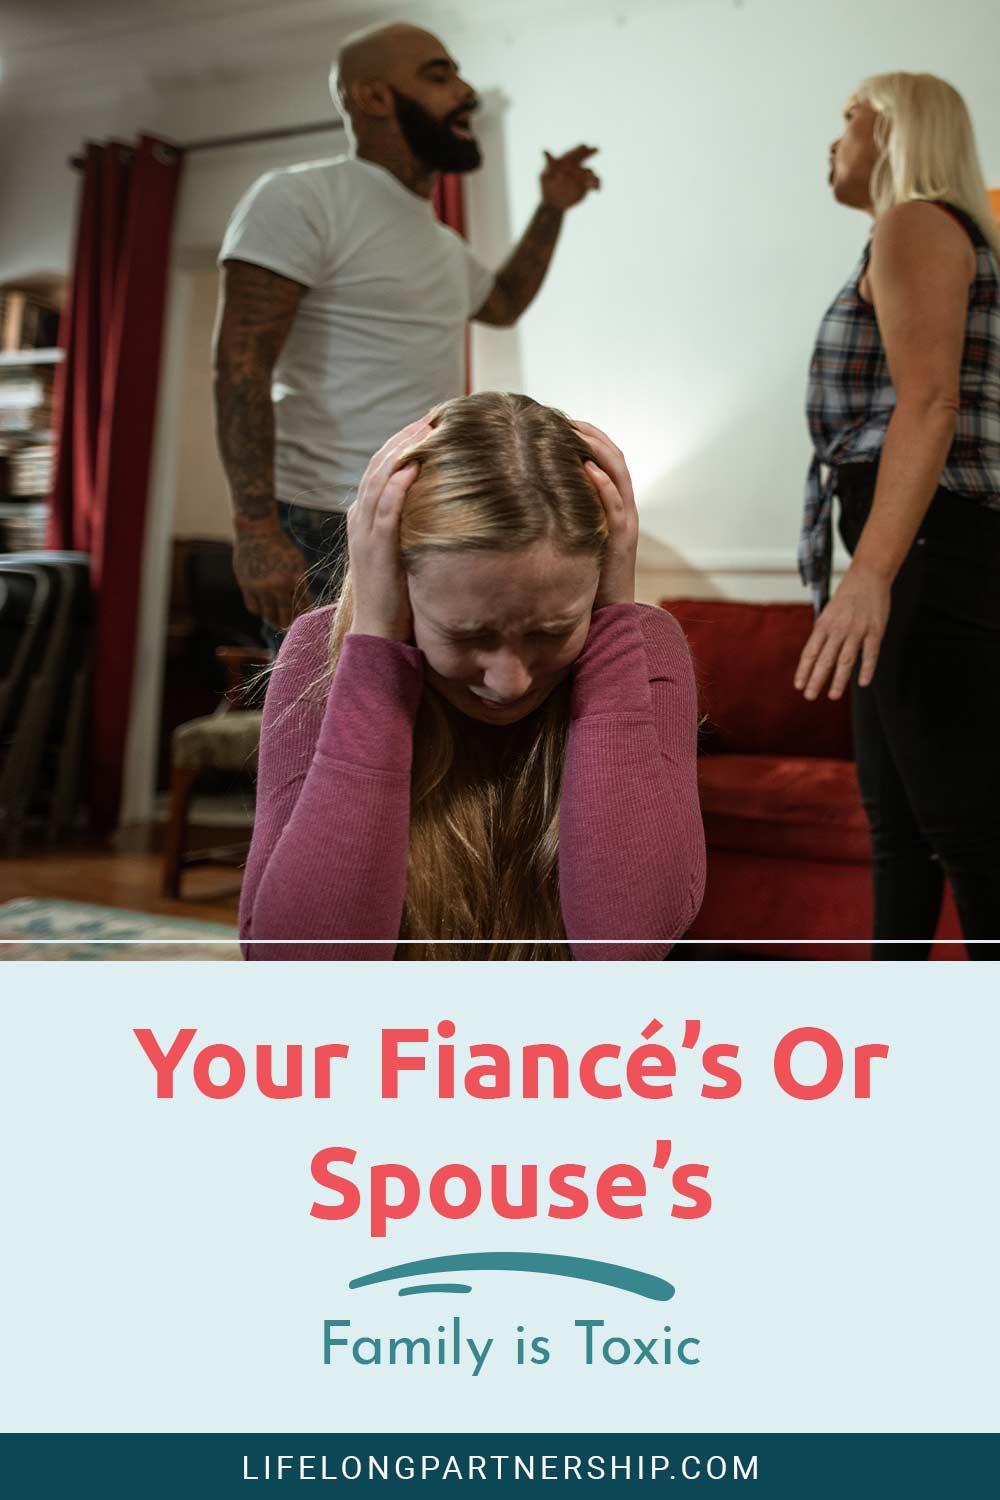 Your Fiancé’s Or Spouse’s Family is Toxic